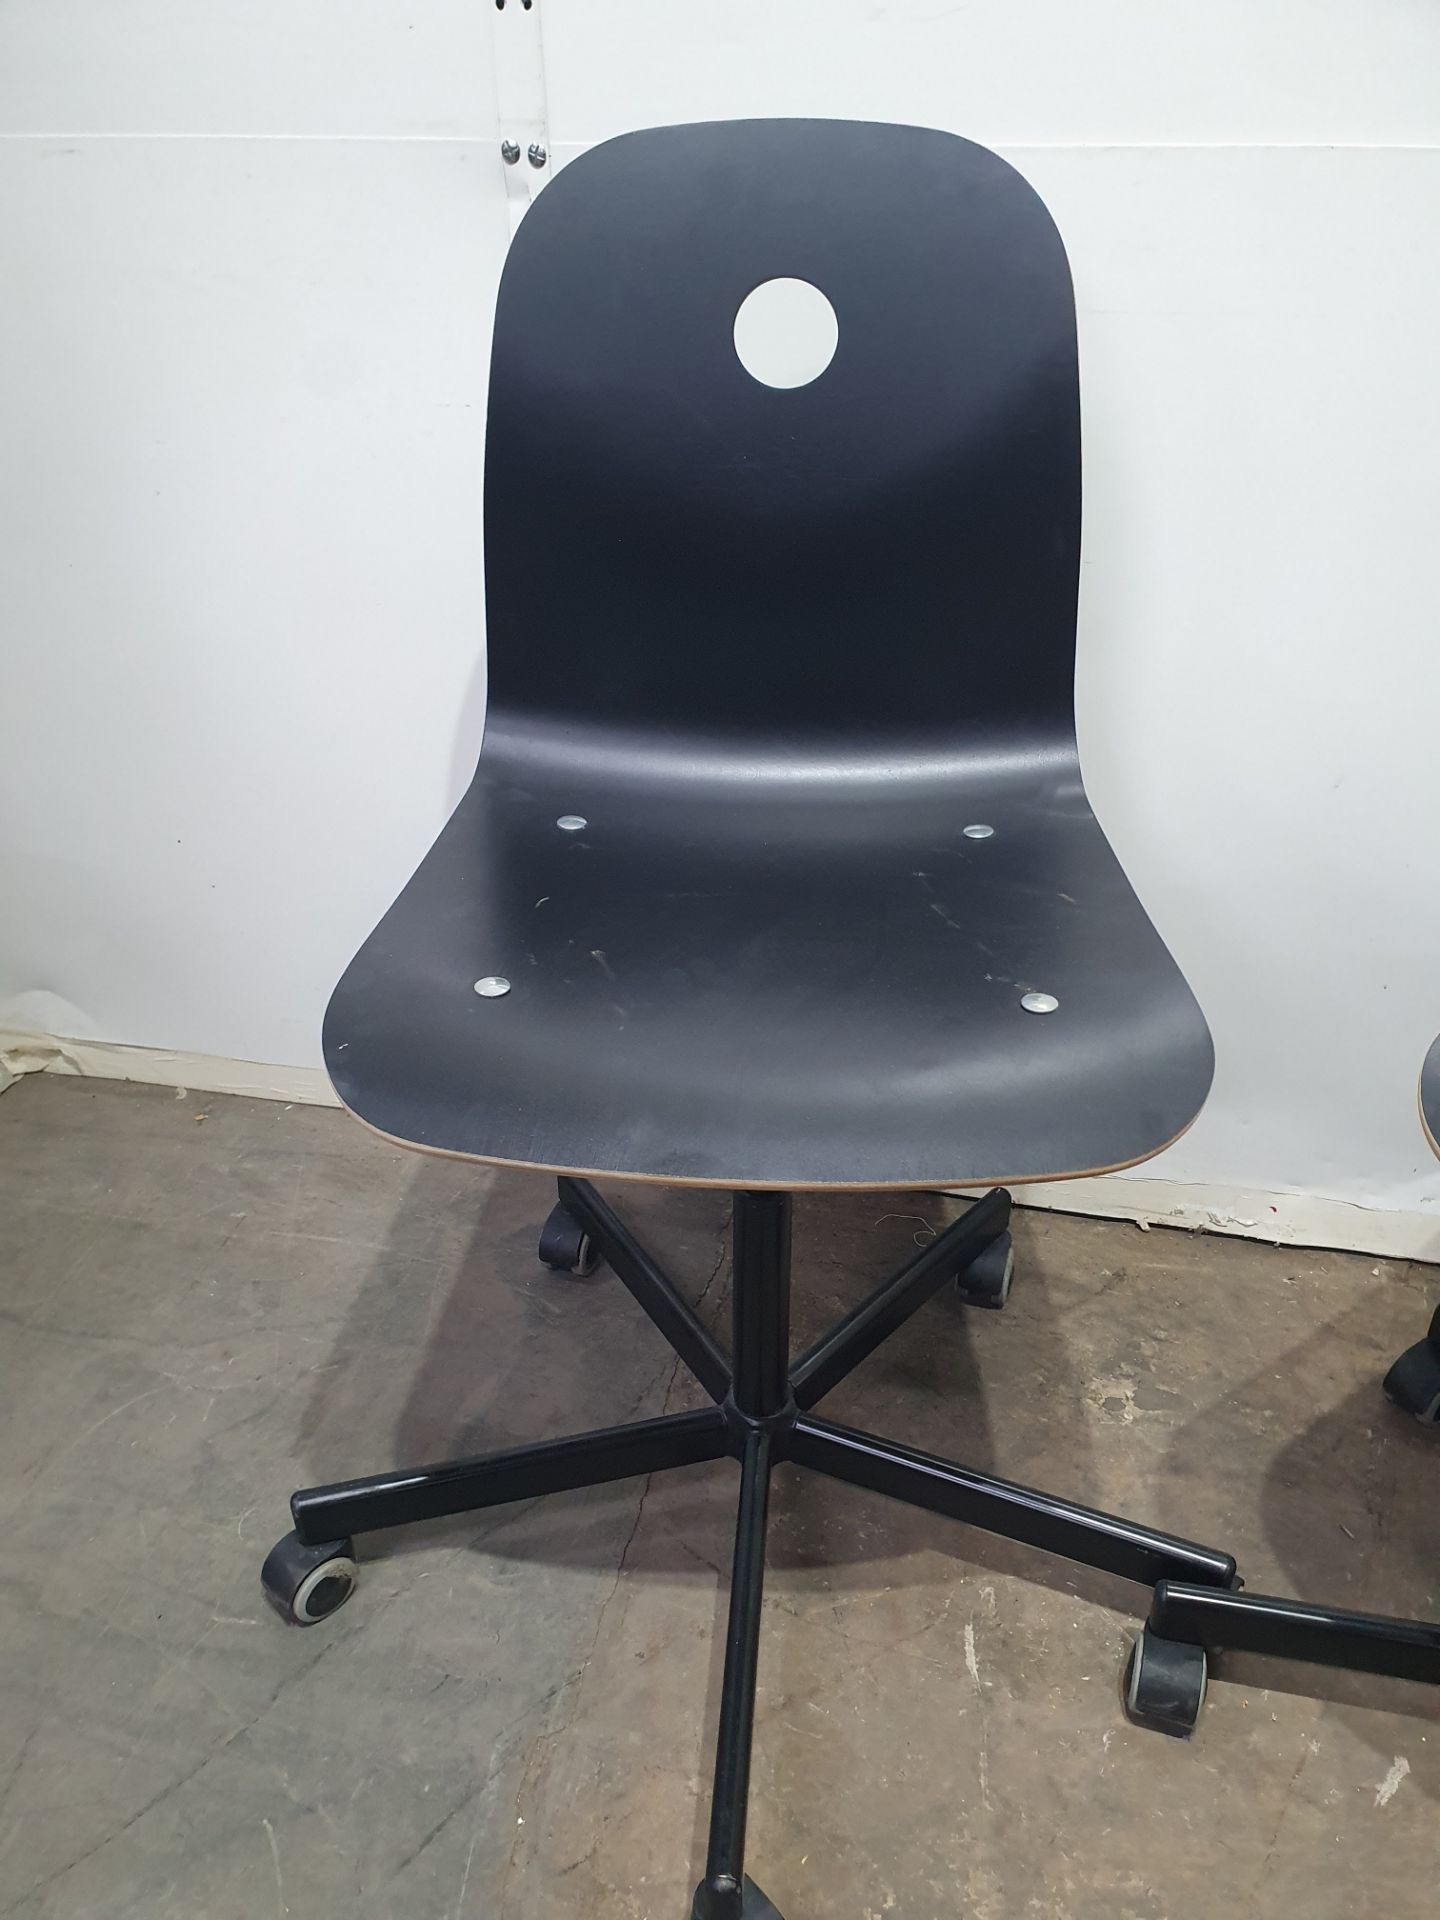 2 x Black Wooden Height Adjustable Chairs on Wheels - Image 2 of 5